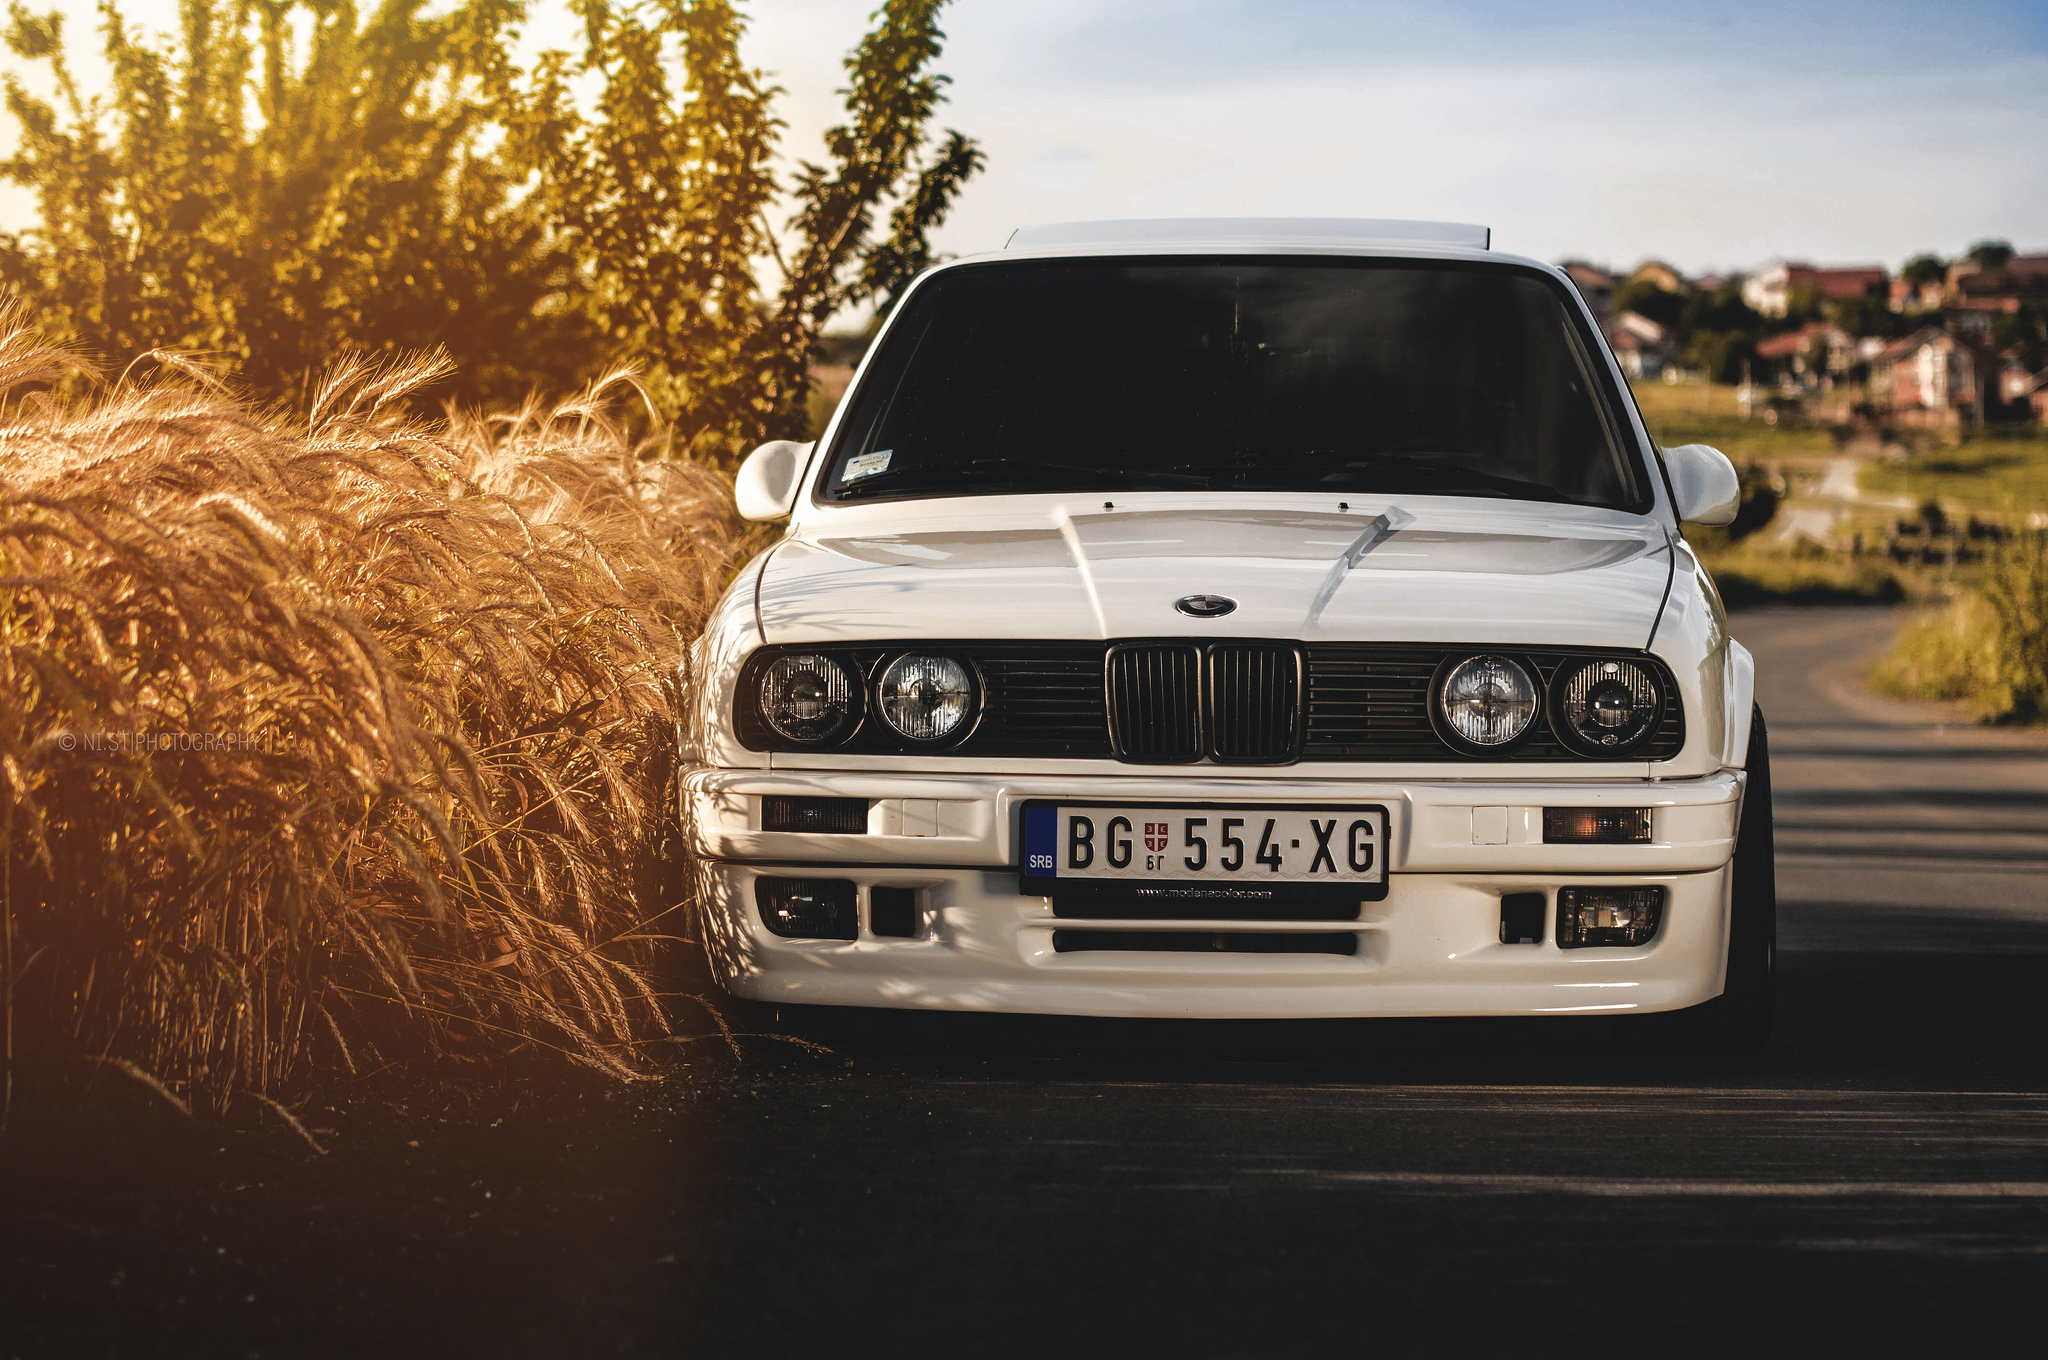 70927 free download White wallpapers for phone, e30, bmw, auto, 325i White images and screensavers for mobile